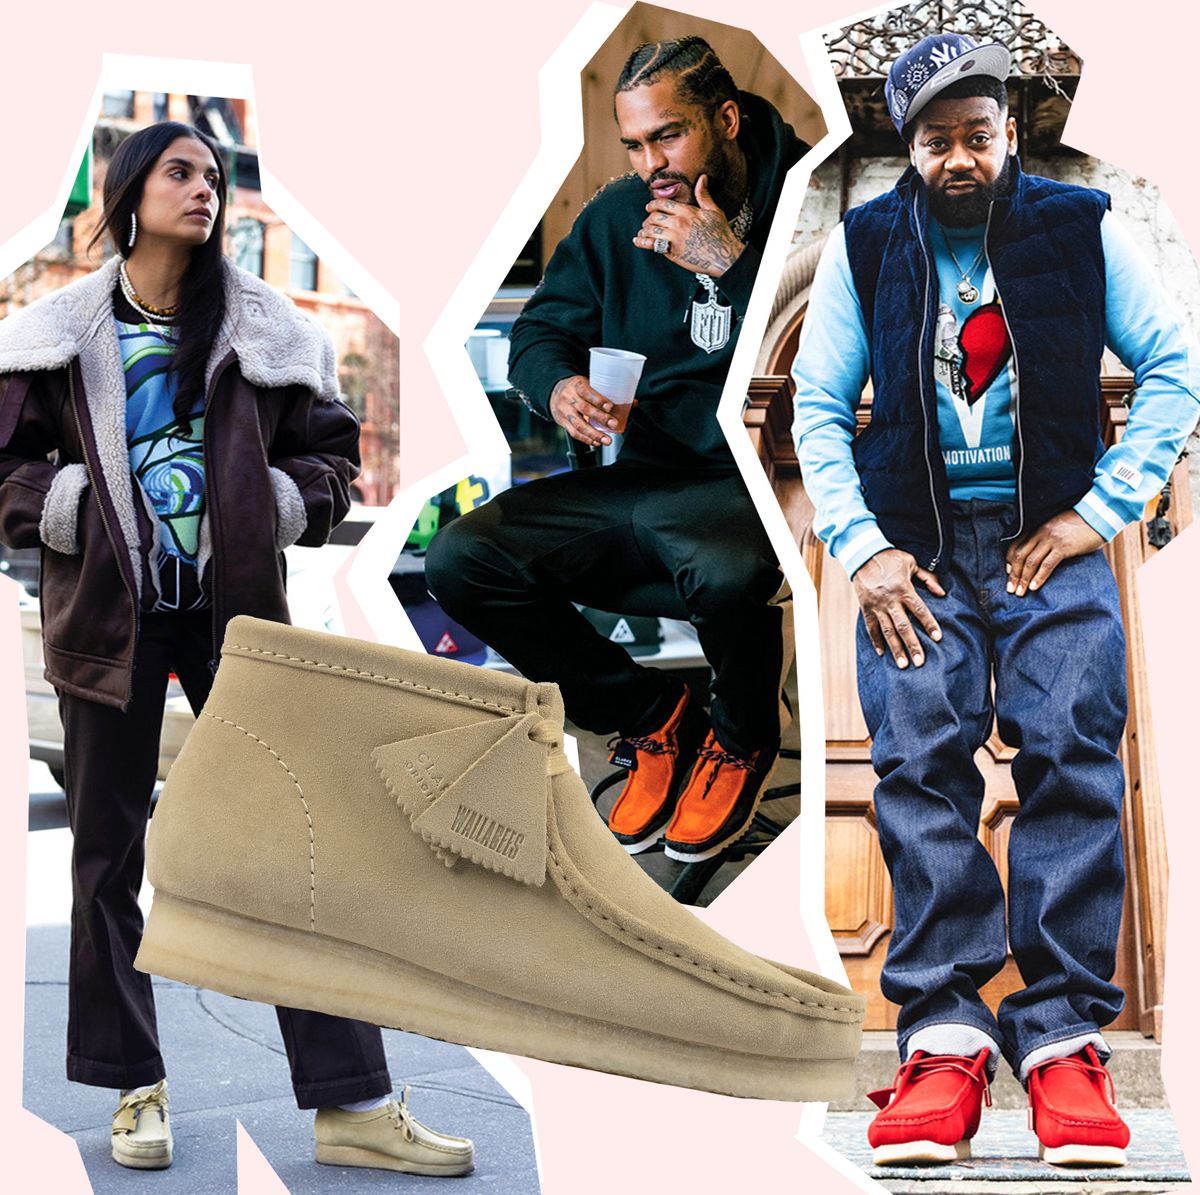 revolution dissipation Kunstig How Clarks Wallabees Became a New York Hip-Hop Icon